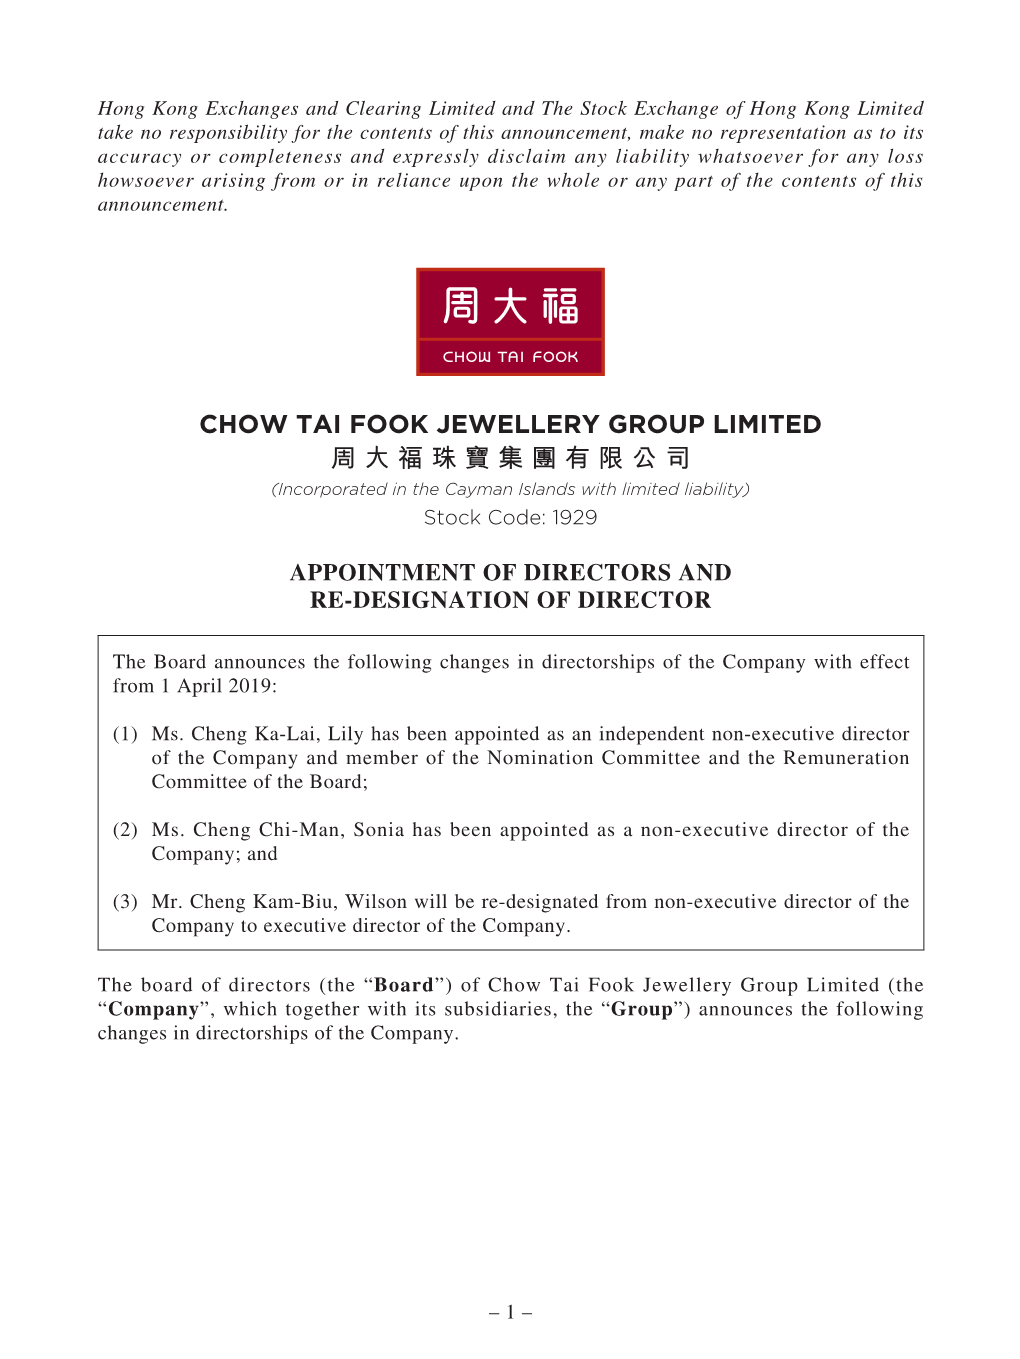 CHOW TAI FOOK JEWELLERY GROUP LIMITED 周 大福珠寶集團有限公司 (Incorporated in the Cayman Islands with Limited Liability) Stock Code: 1929